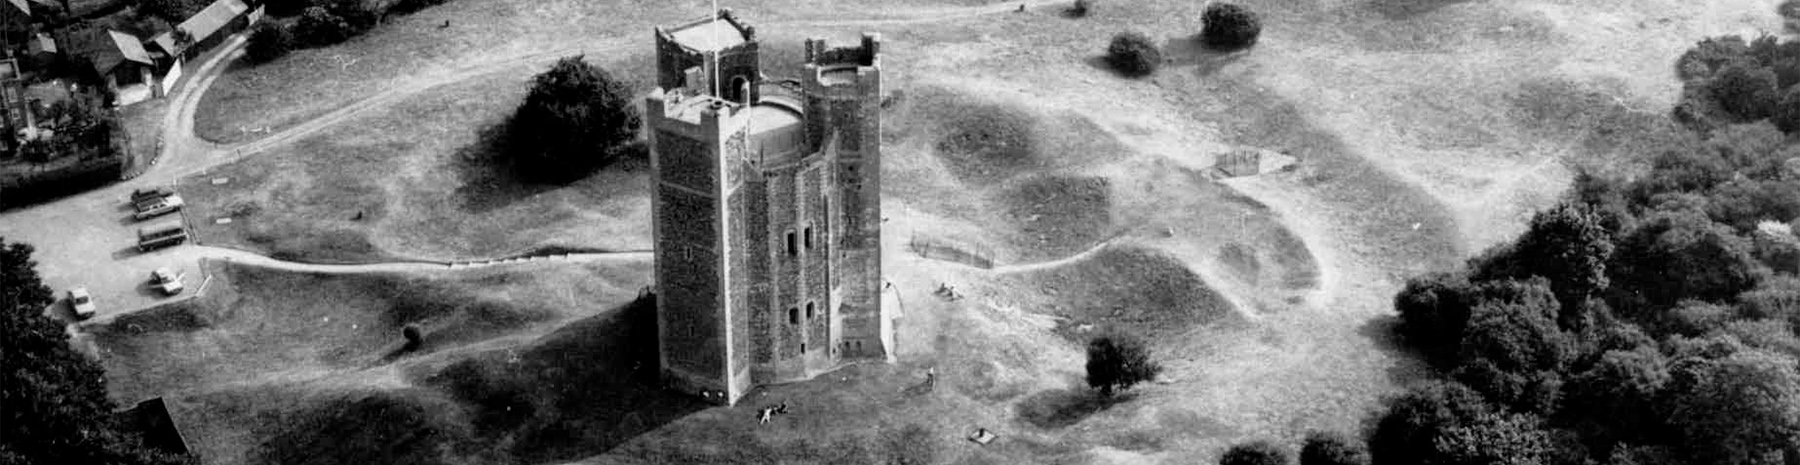 black and white photo of Orford Castle from above